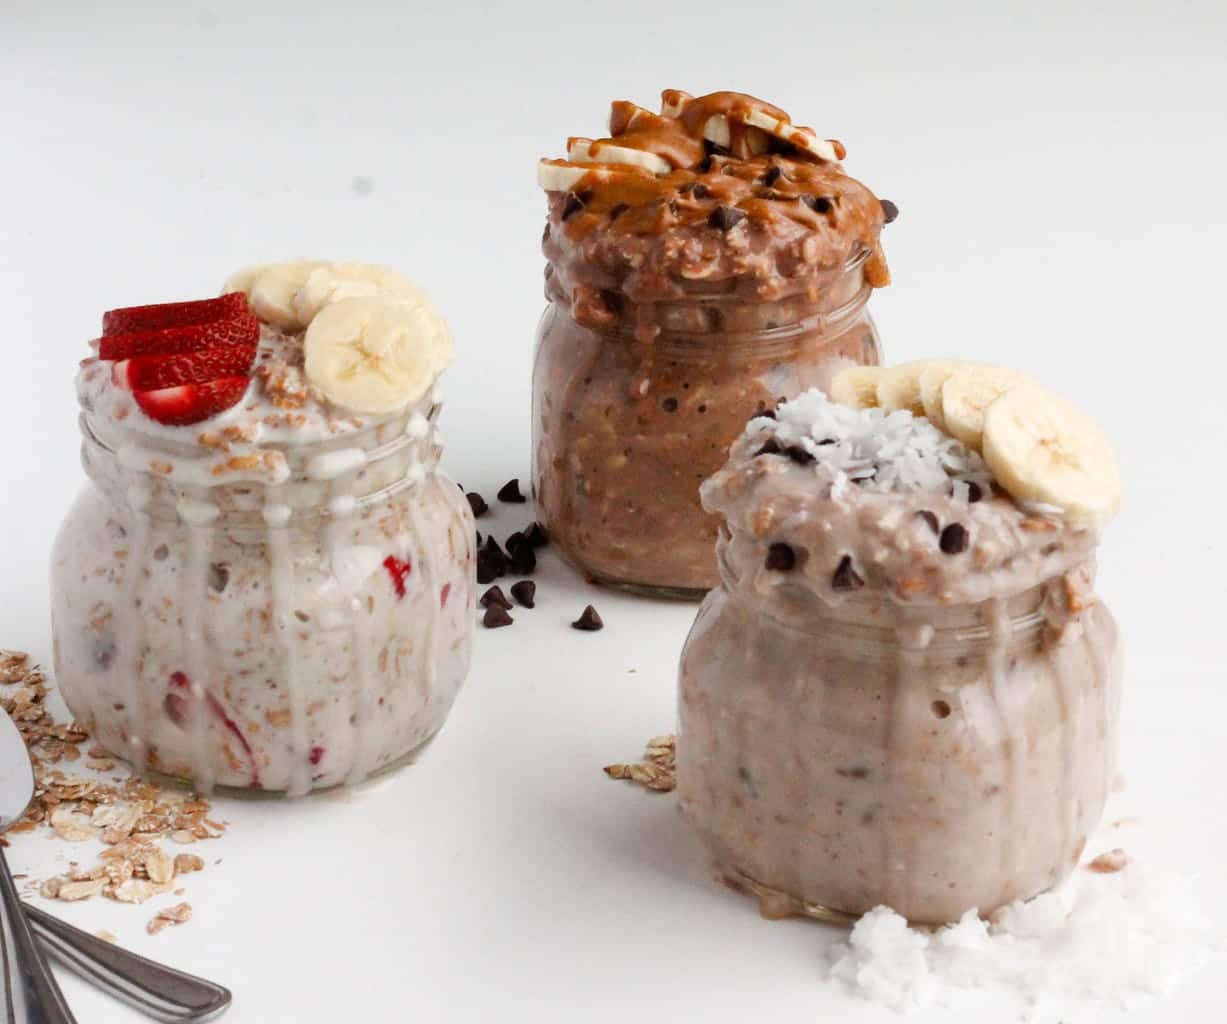 Overnight Oats in a Jar 3 Quick Healthy Recipes-3 - Smile Sandwich